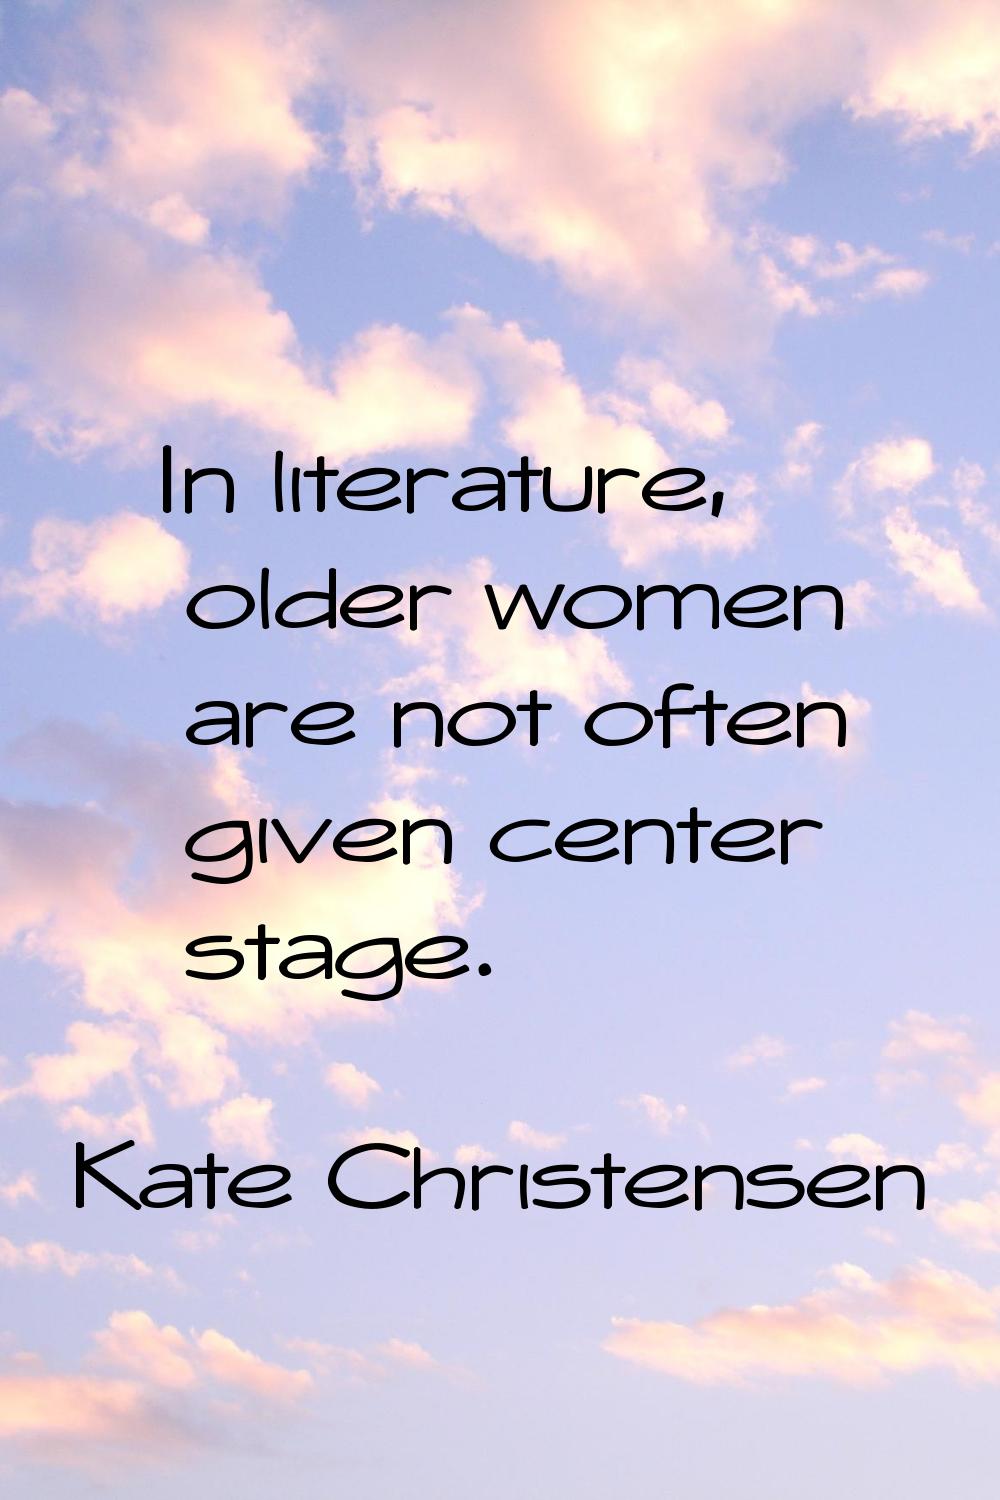 In literature, older women are not often given center stage.